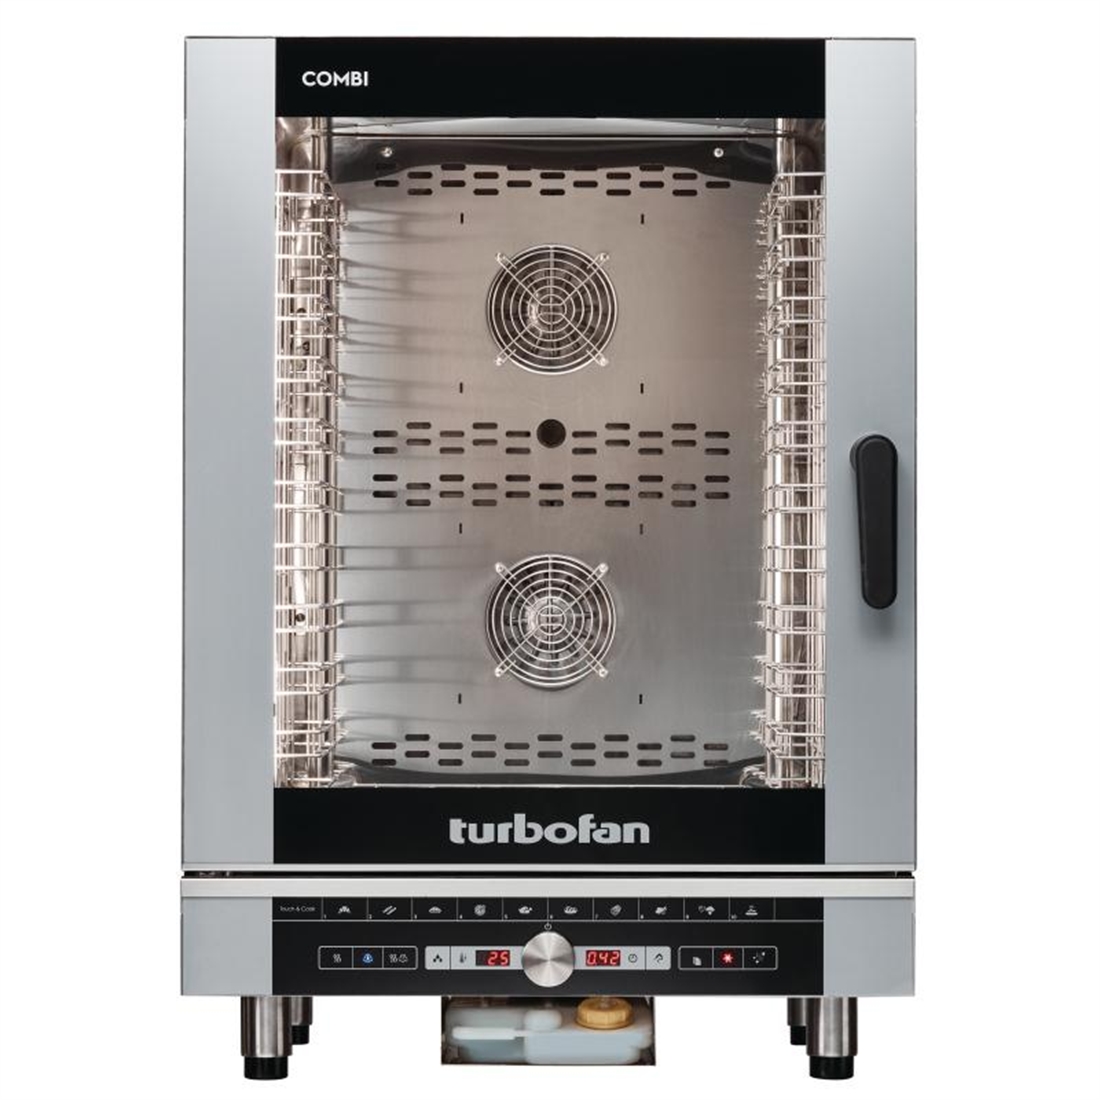 Blue Seal Turbofan 10 Grid Touch Control Combi Oven with Auto Wash EC40D10